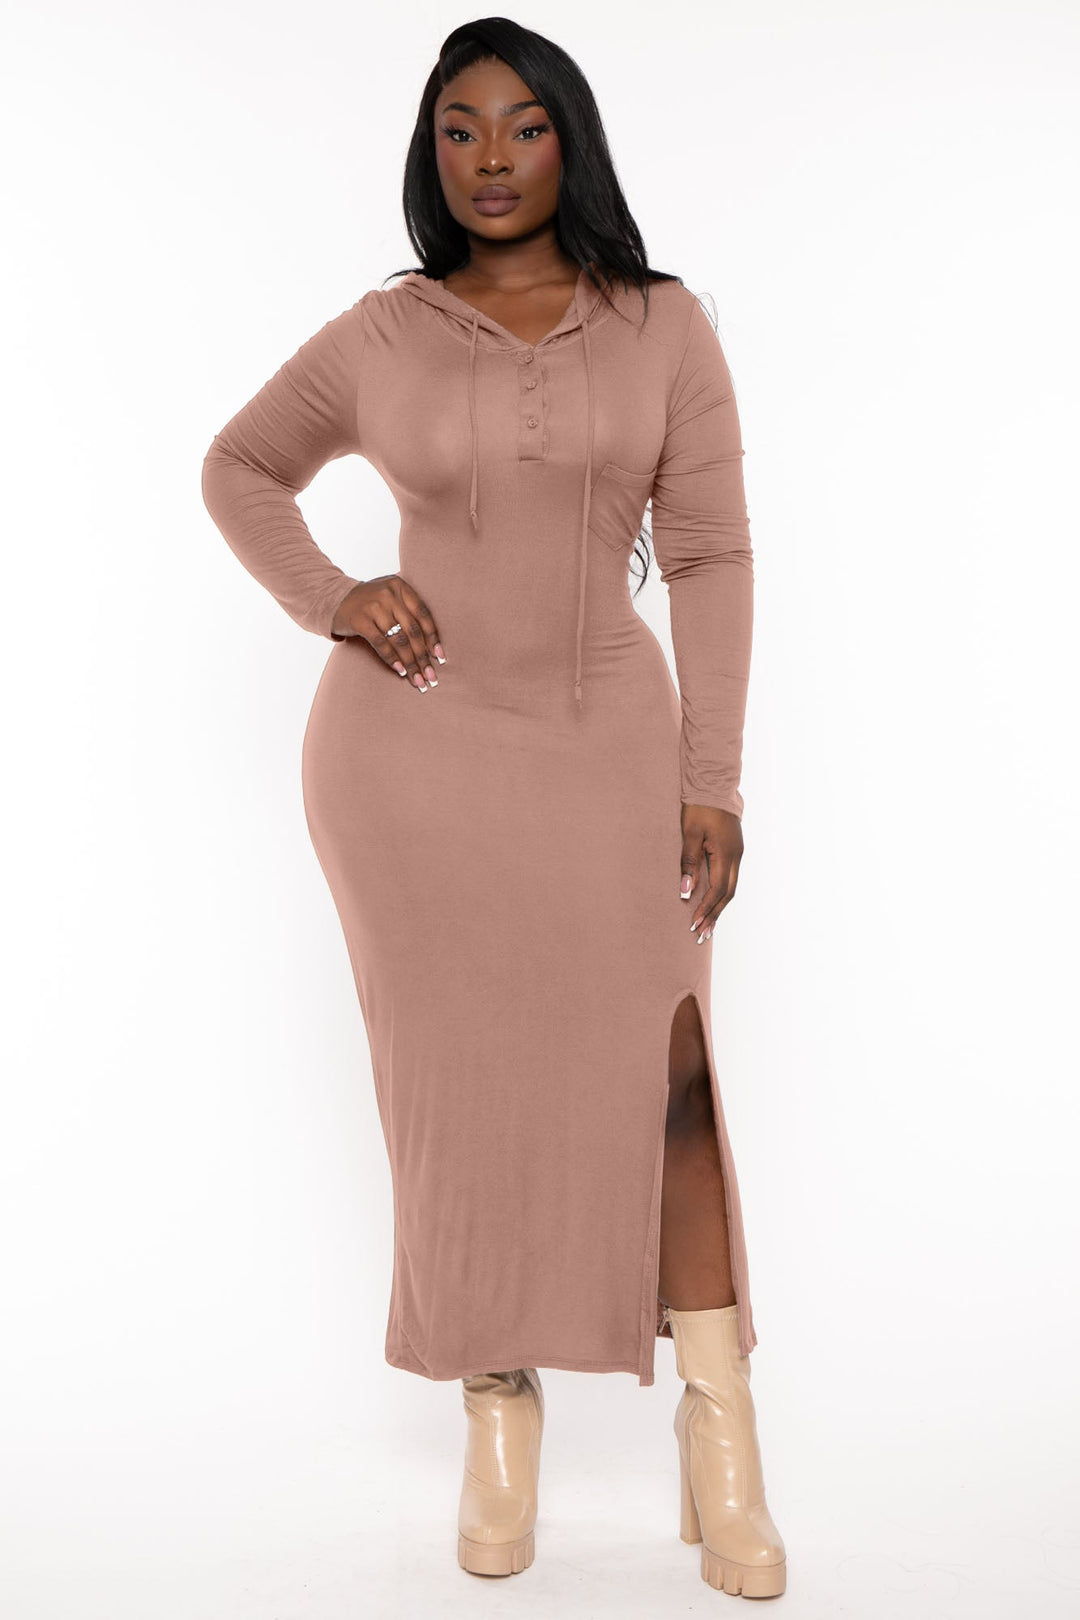 CULTURE CODE Dresses 1X / Taupe Plus Size Adrienne Hoodie Maxi  Dress - Taupe